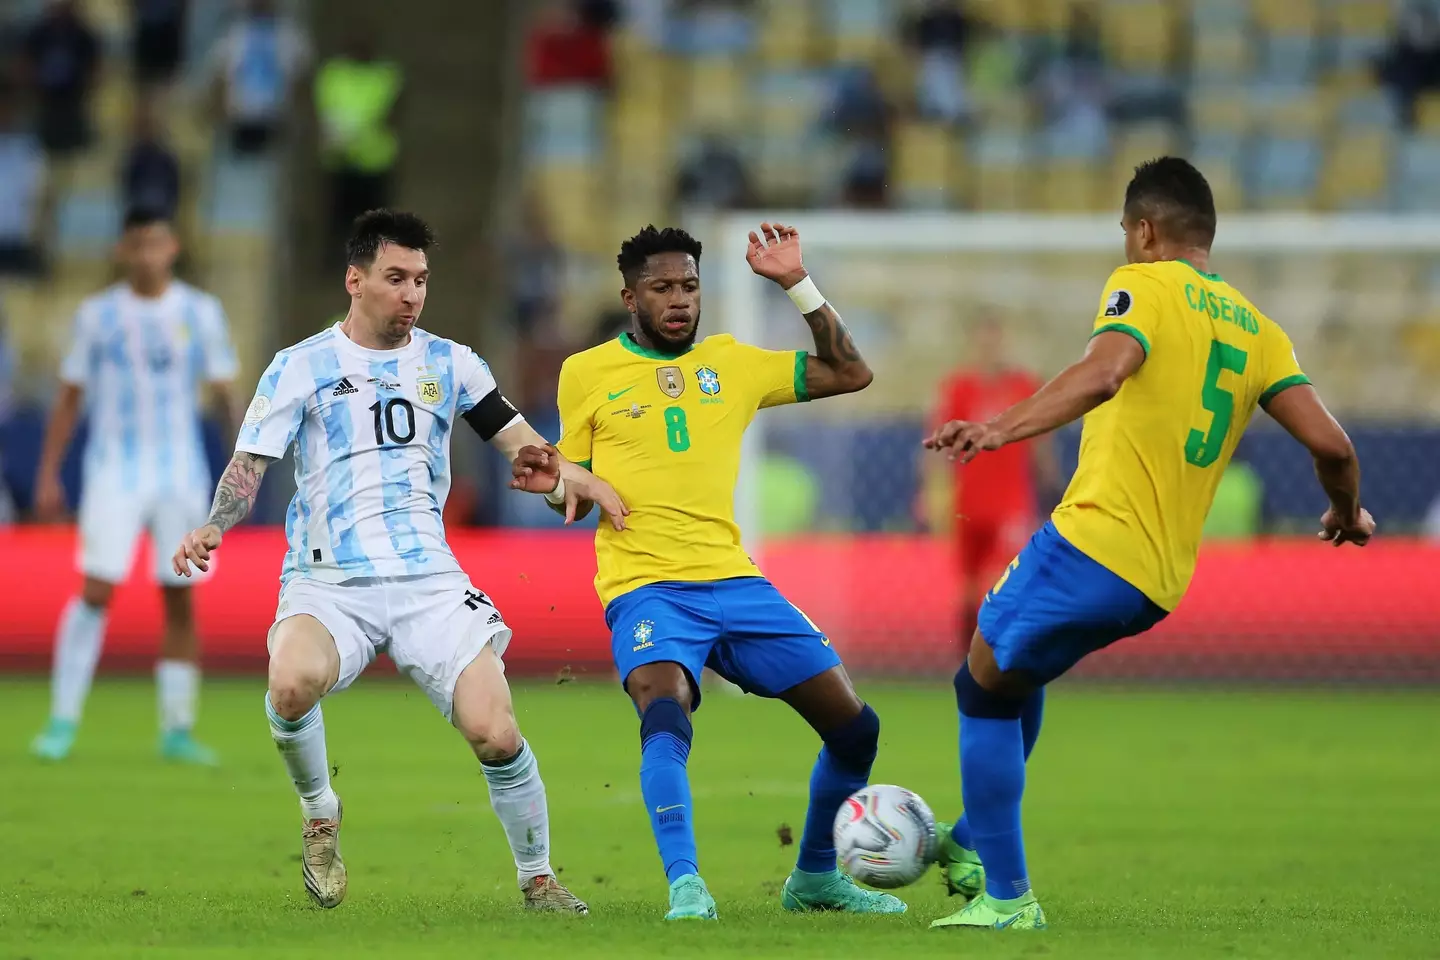 Fred and Casemiro for Brazil against Lionel Messi and Argentina (Alamy)